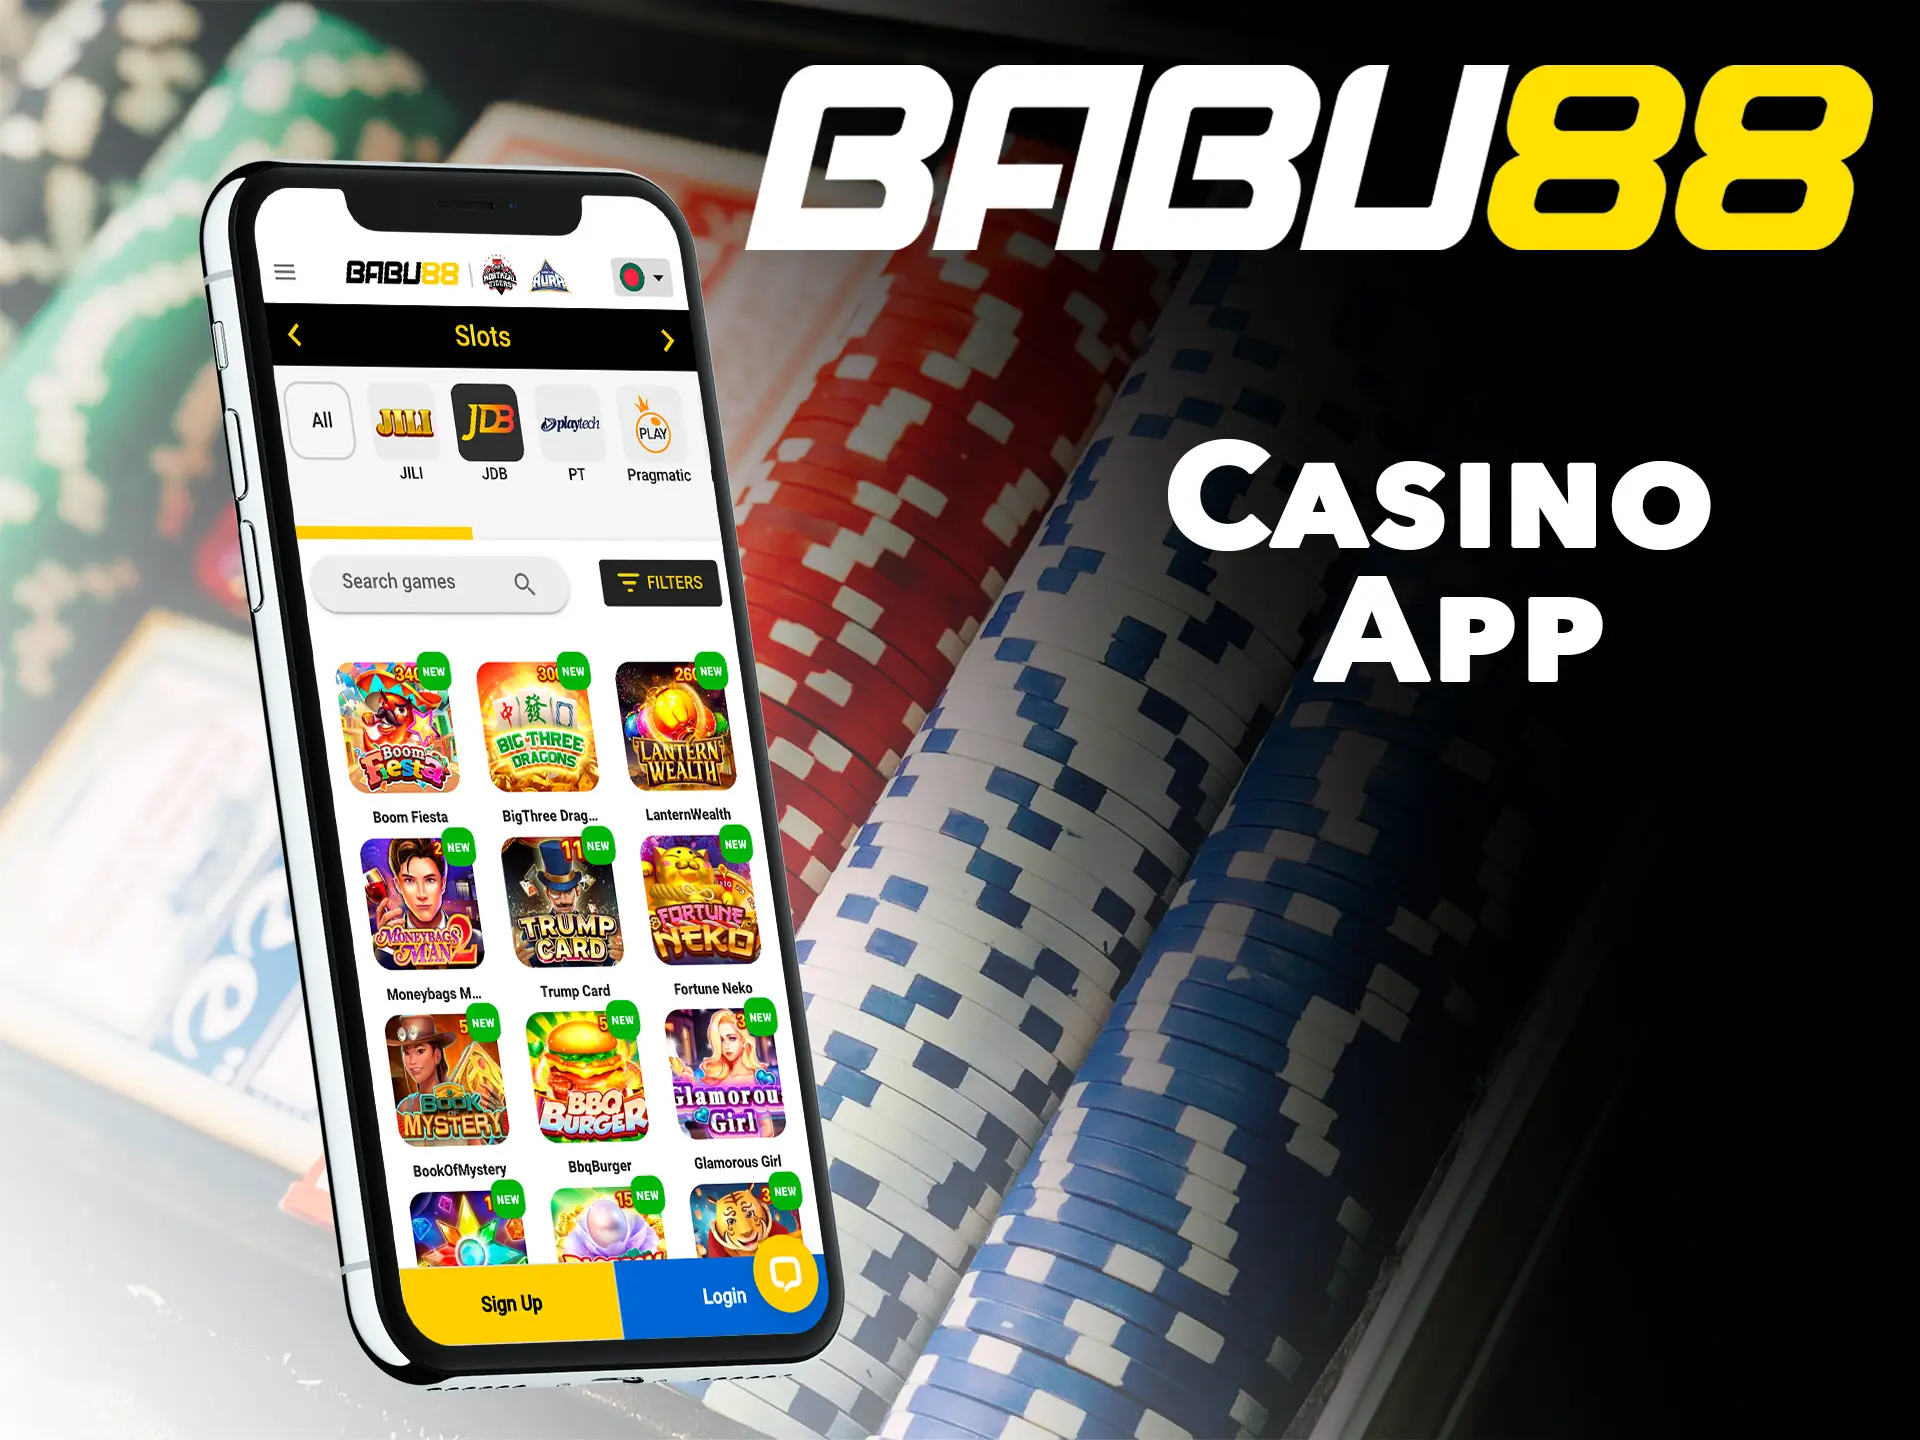 Get access to the gambling section after installing the Babu88 app on your smartphone.